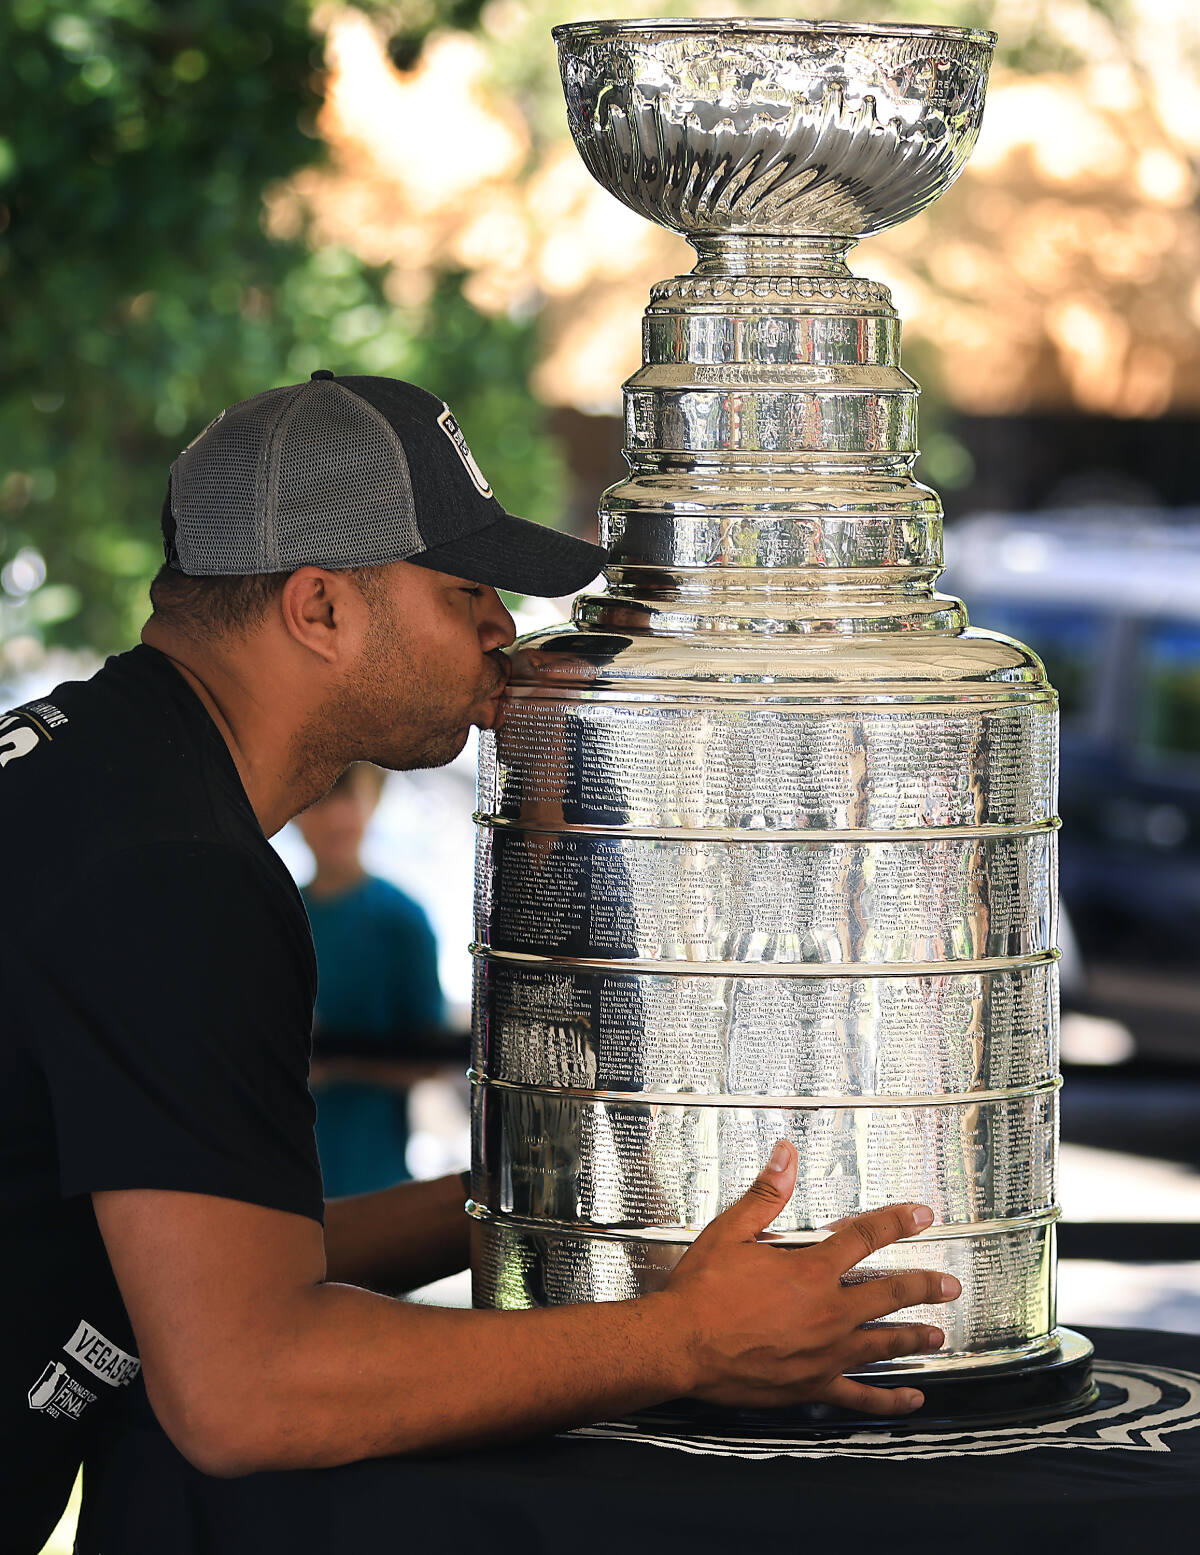 Lord Stanley's Cup Meets Globalization